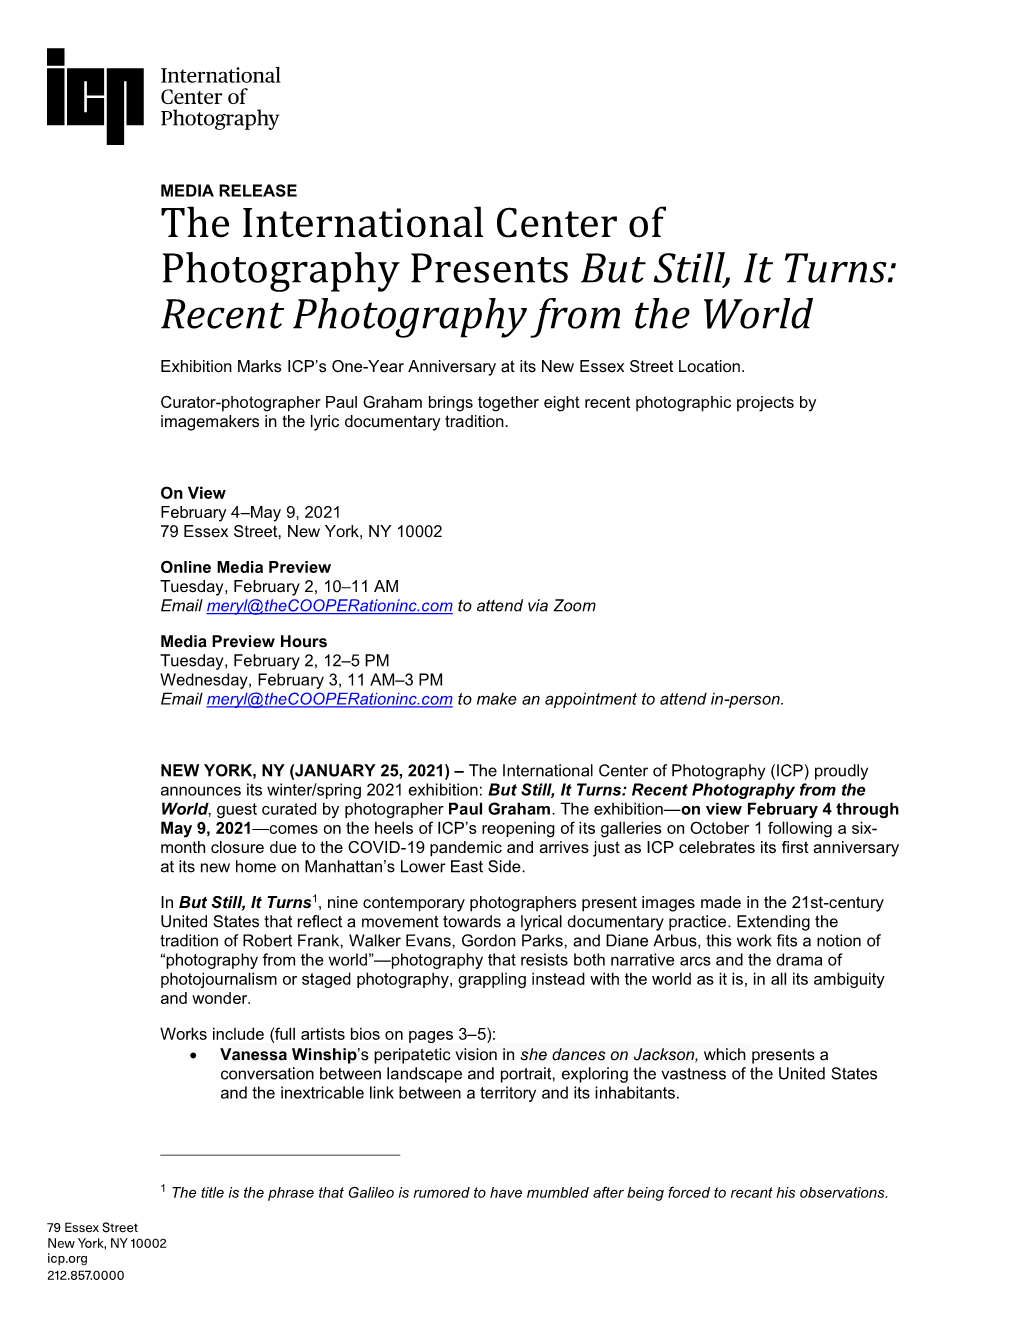 The International Center of Photography Presents but Still, It Turns: Recent Photography from the World